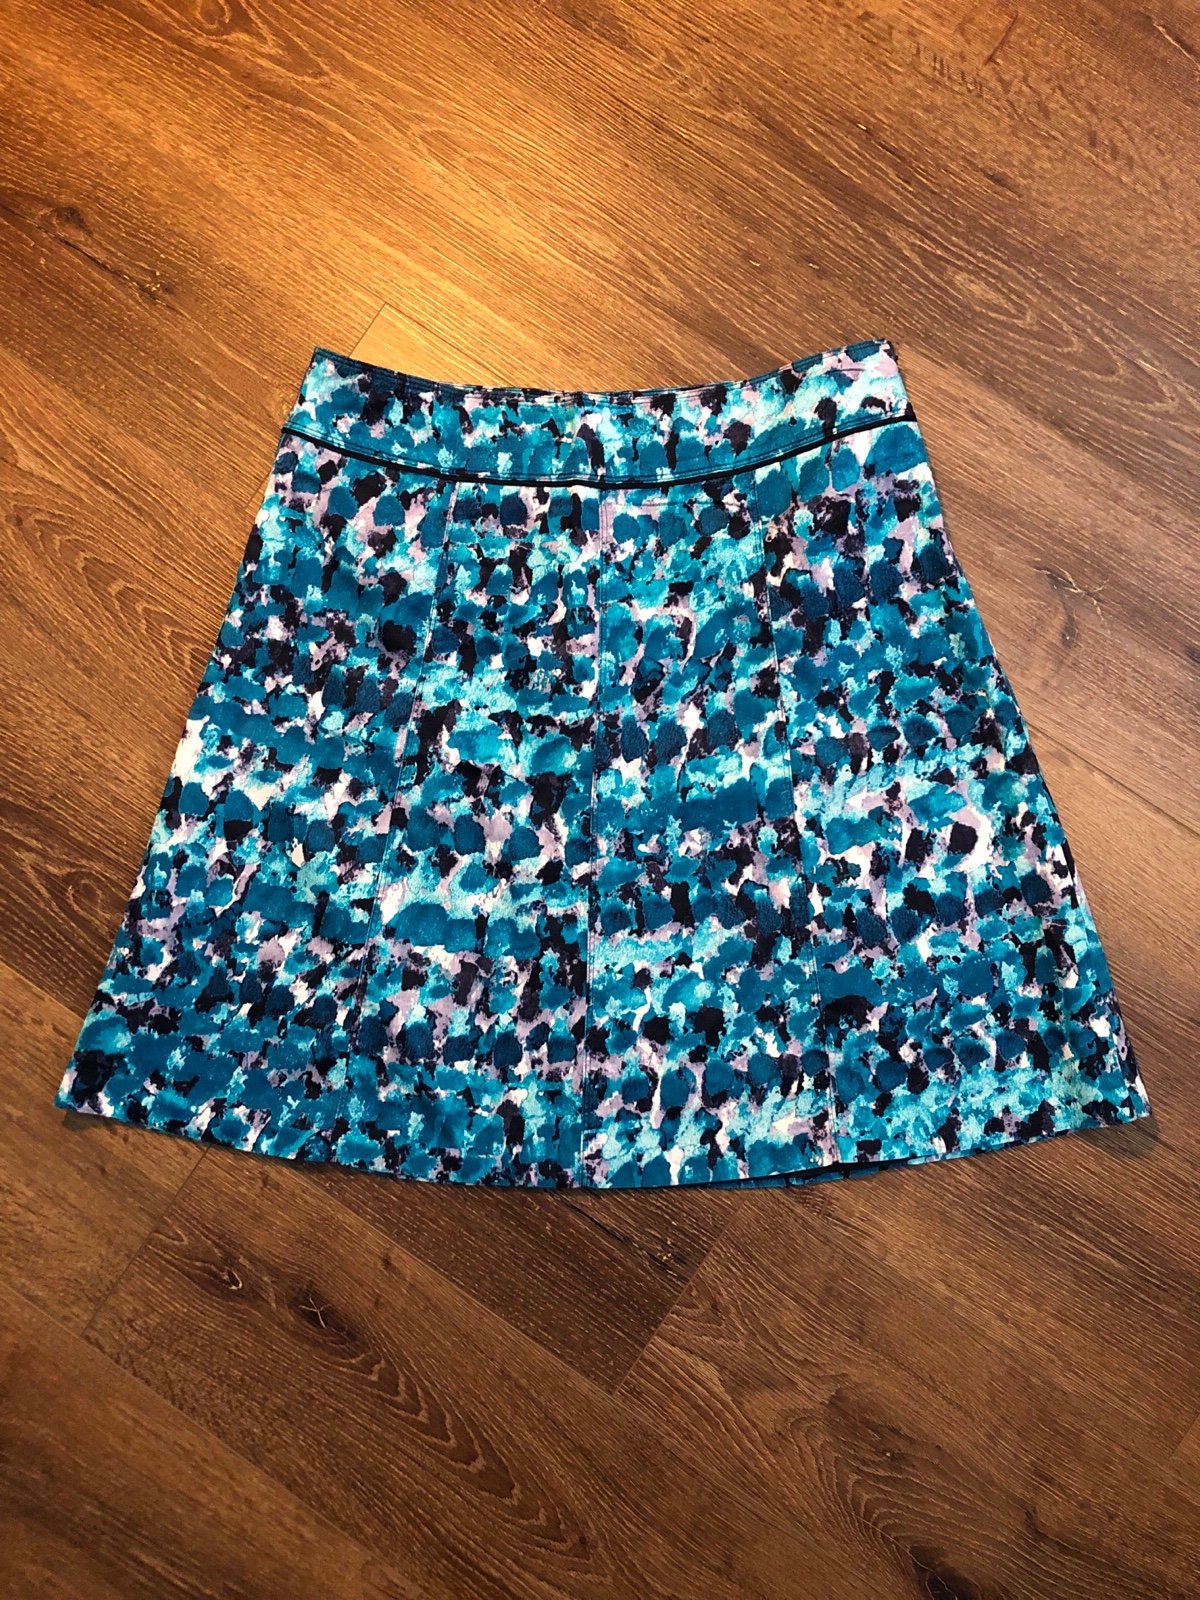 Personality Ann Taylor Blue Floral Flared Lined Skirt Size 10 Side Zipper Knee Length o2OJlHwbL Fashion